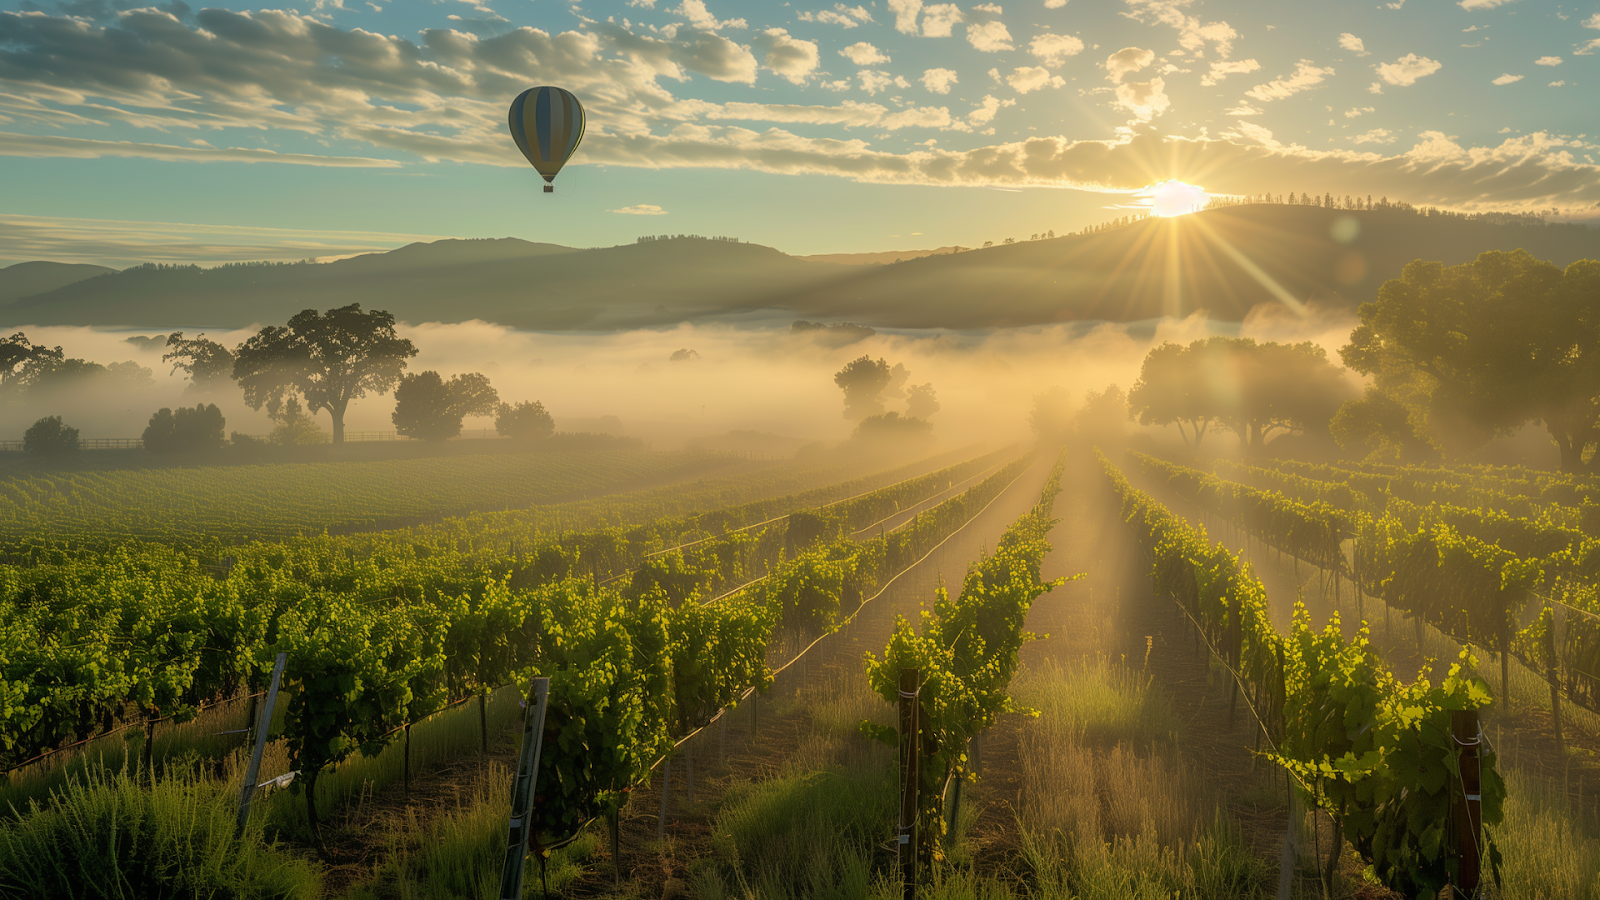 Early morning in Napa Valley with sunlight piercing through fog over vineyards and a hot air balloon in the distance.